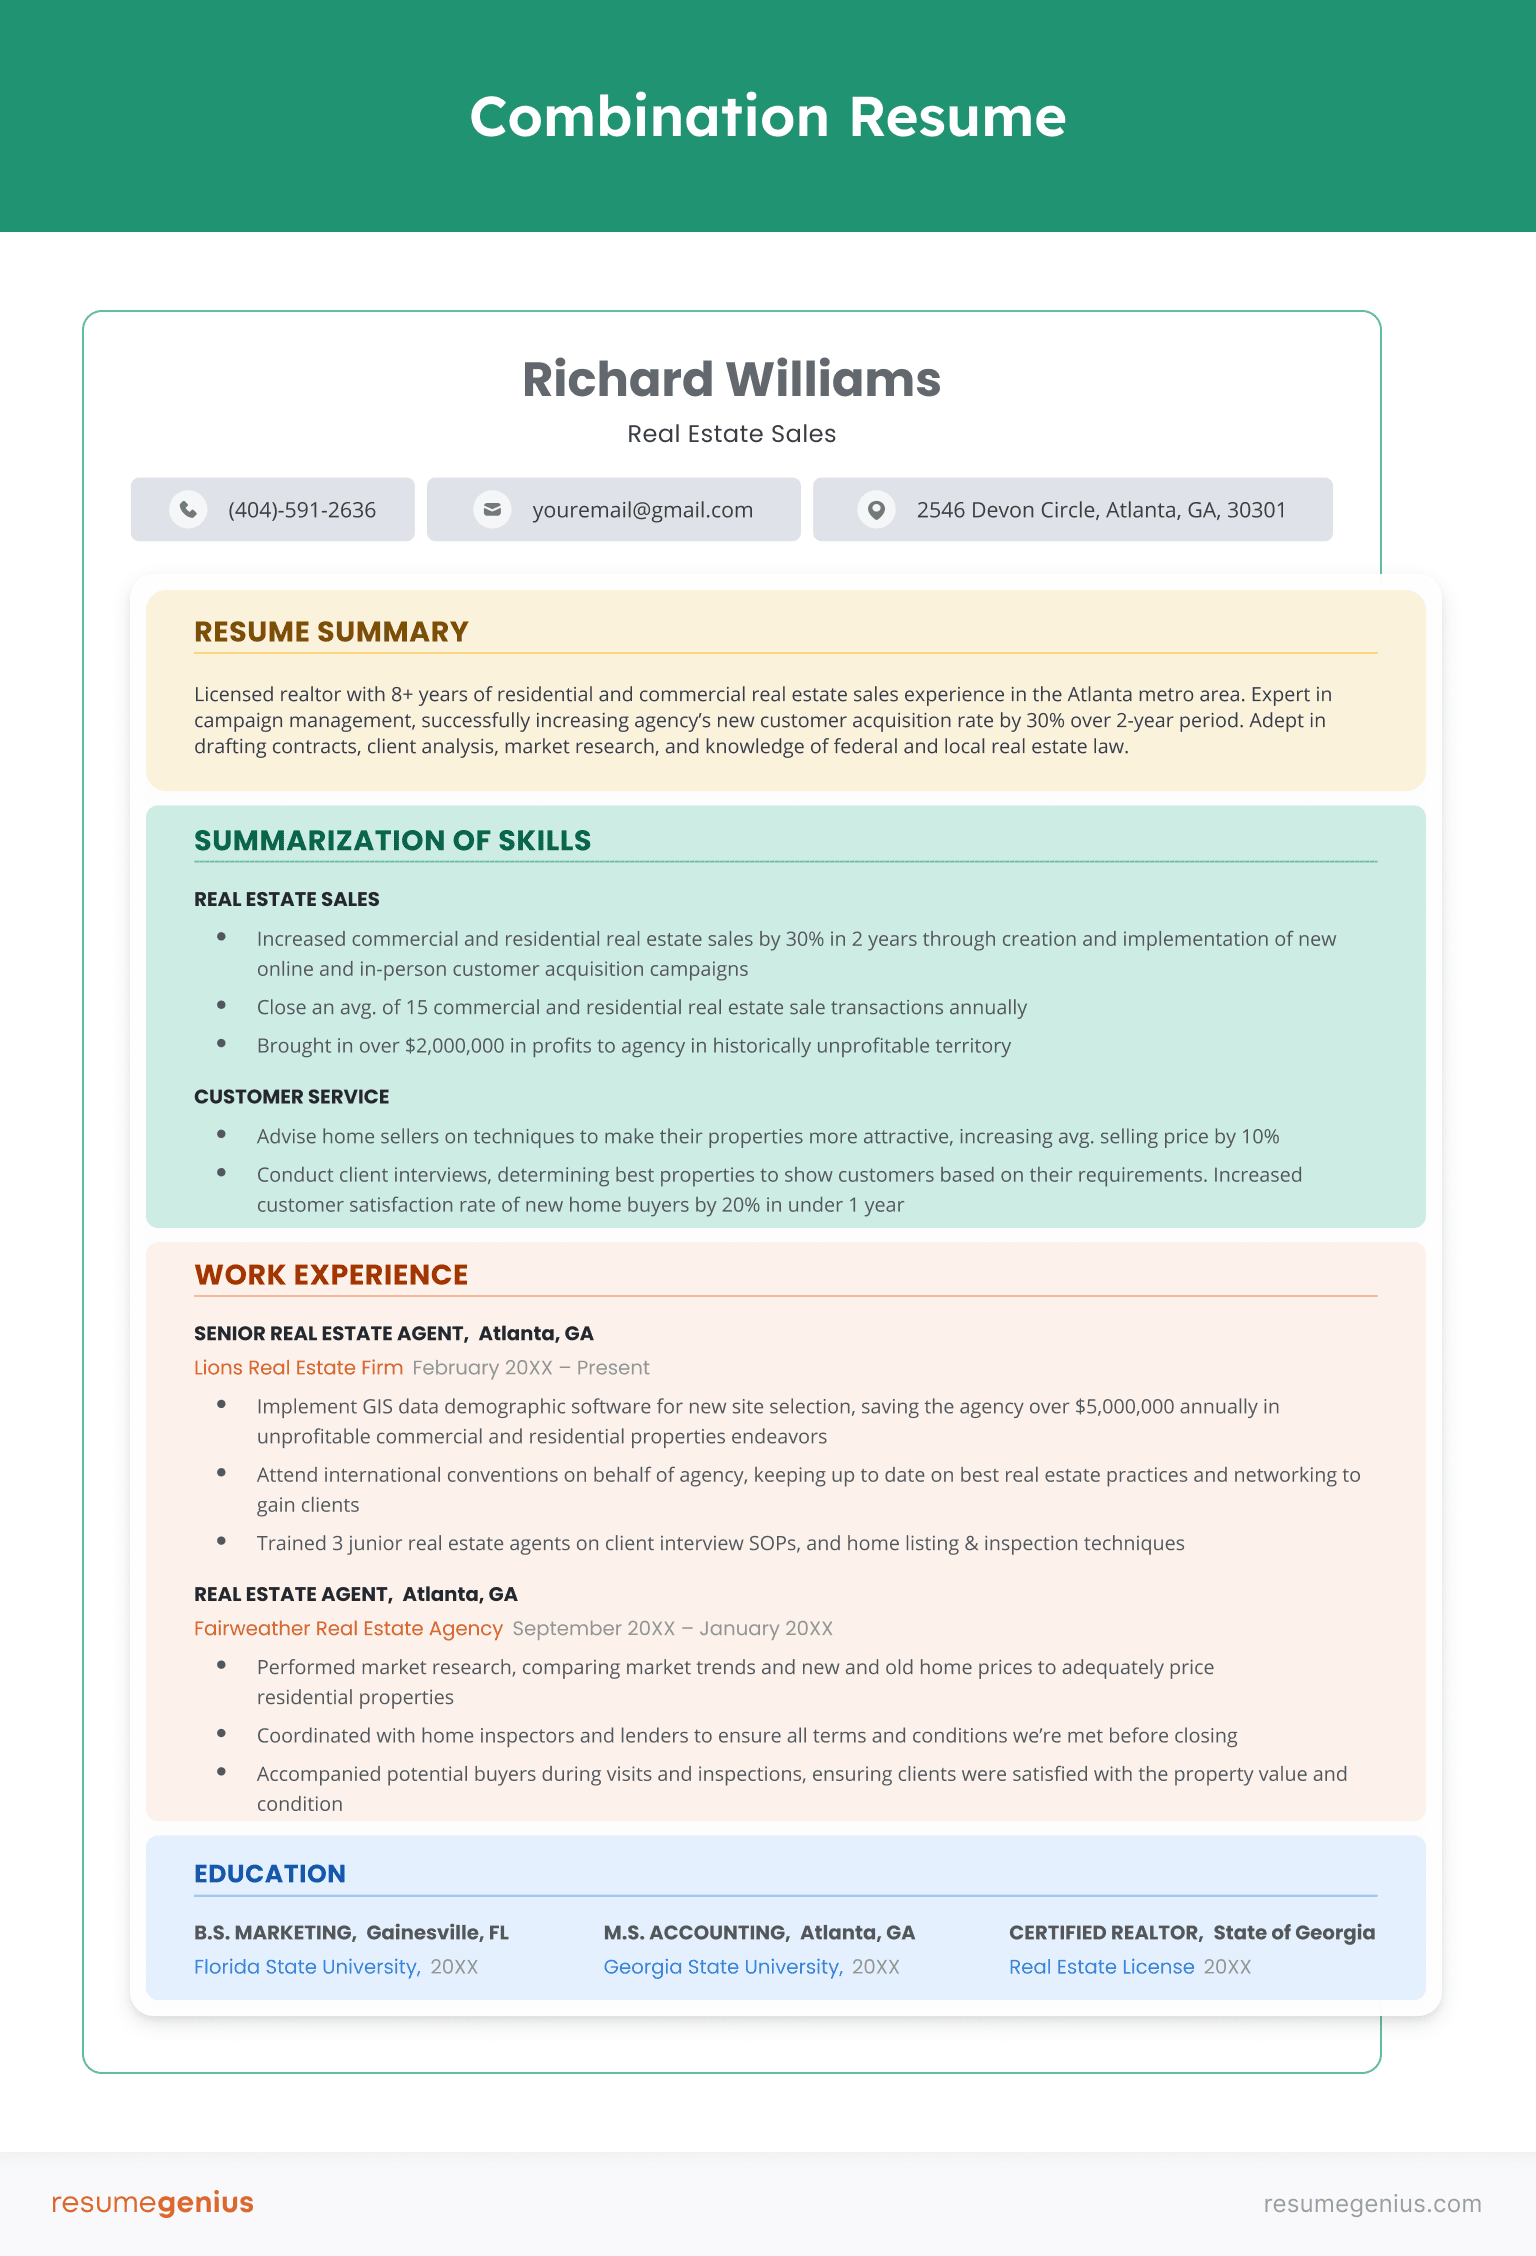 An example showing the structure of a combination resume